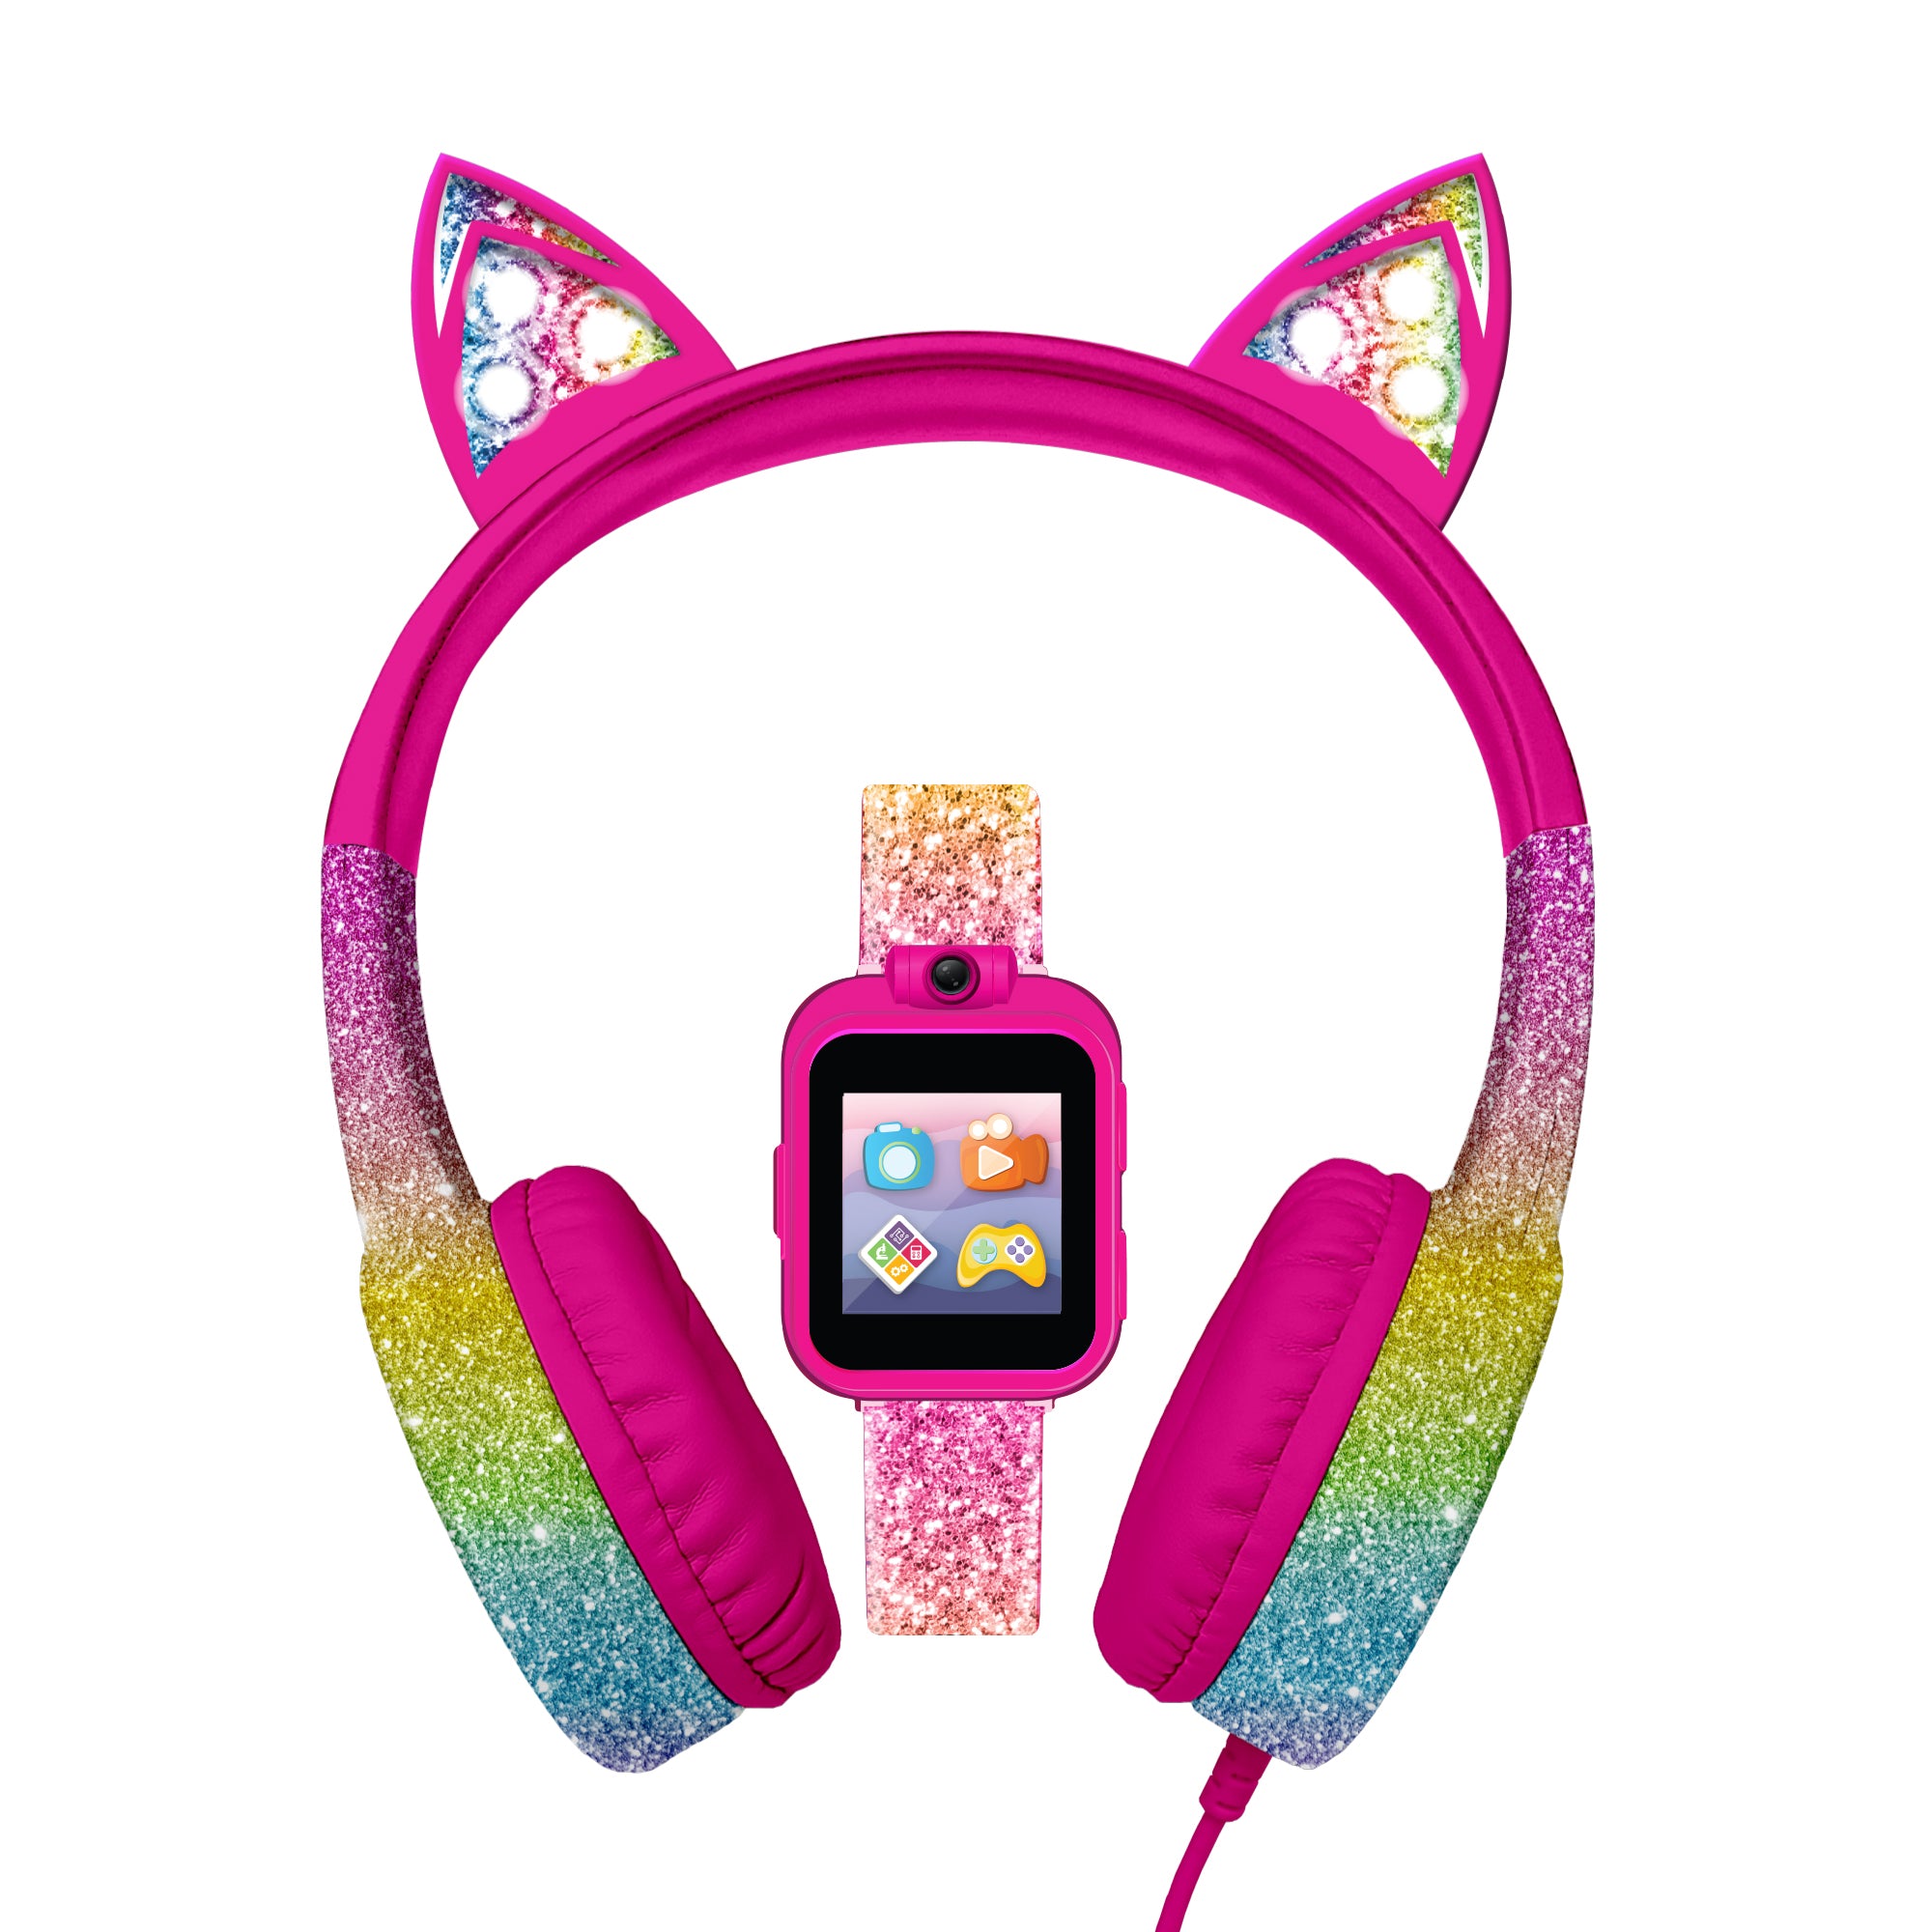 PlayZoom 2 Kids Smartwatch with Headphones: Multi Glitter with Ears affordable smart watch with headphones